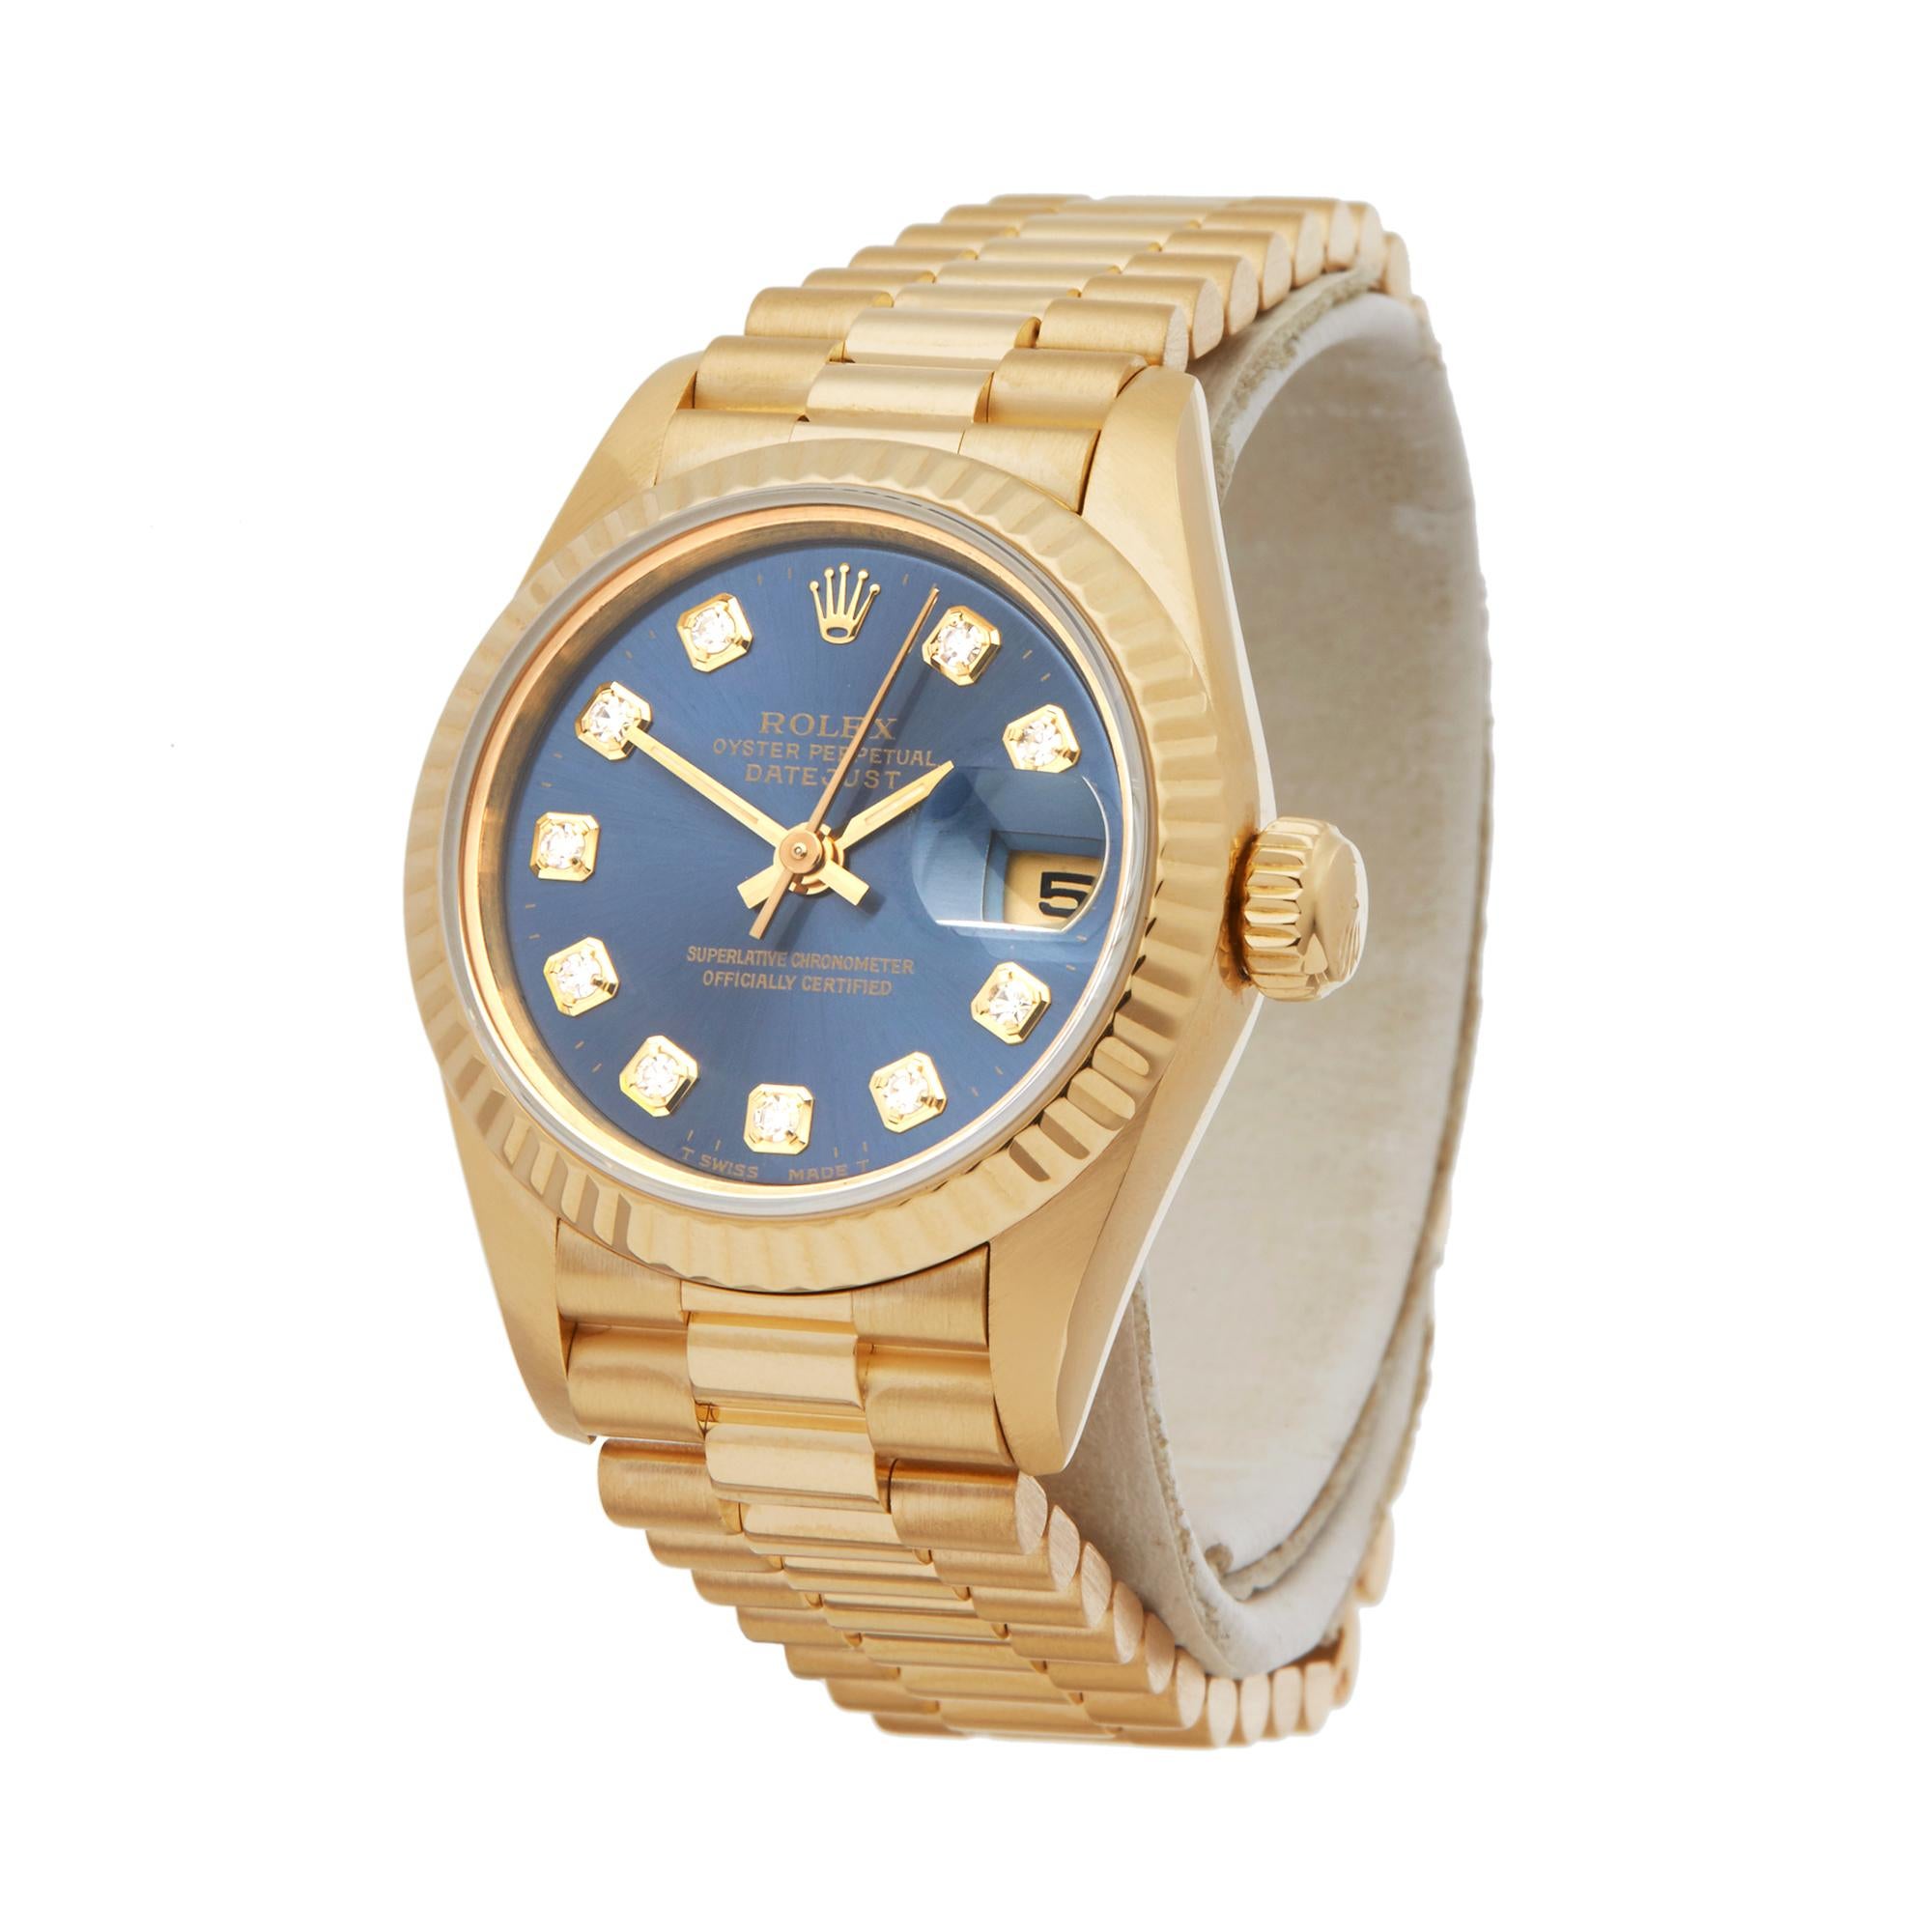 Reference: W5739
Manufacturer: Rolex
Model: Datejust
Model Reference: 69178
Age: Circa 1995
Gender: Women's
Box and Papers: Box Only
Dial: Blue Diamond Markers
Glass: Sapphire Crystal
Movement: Automatic
Water Resistance: To Manufacturers